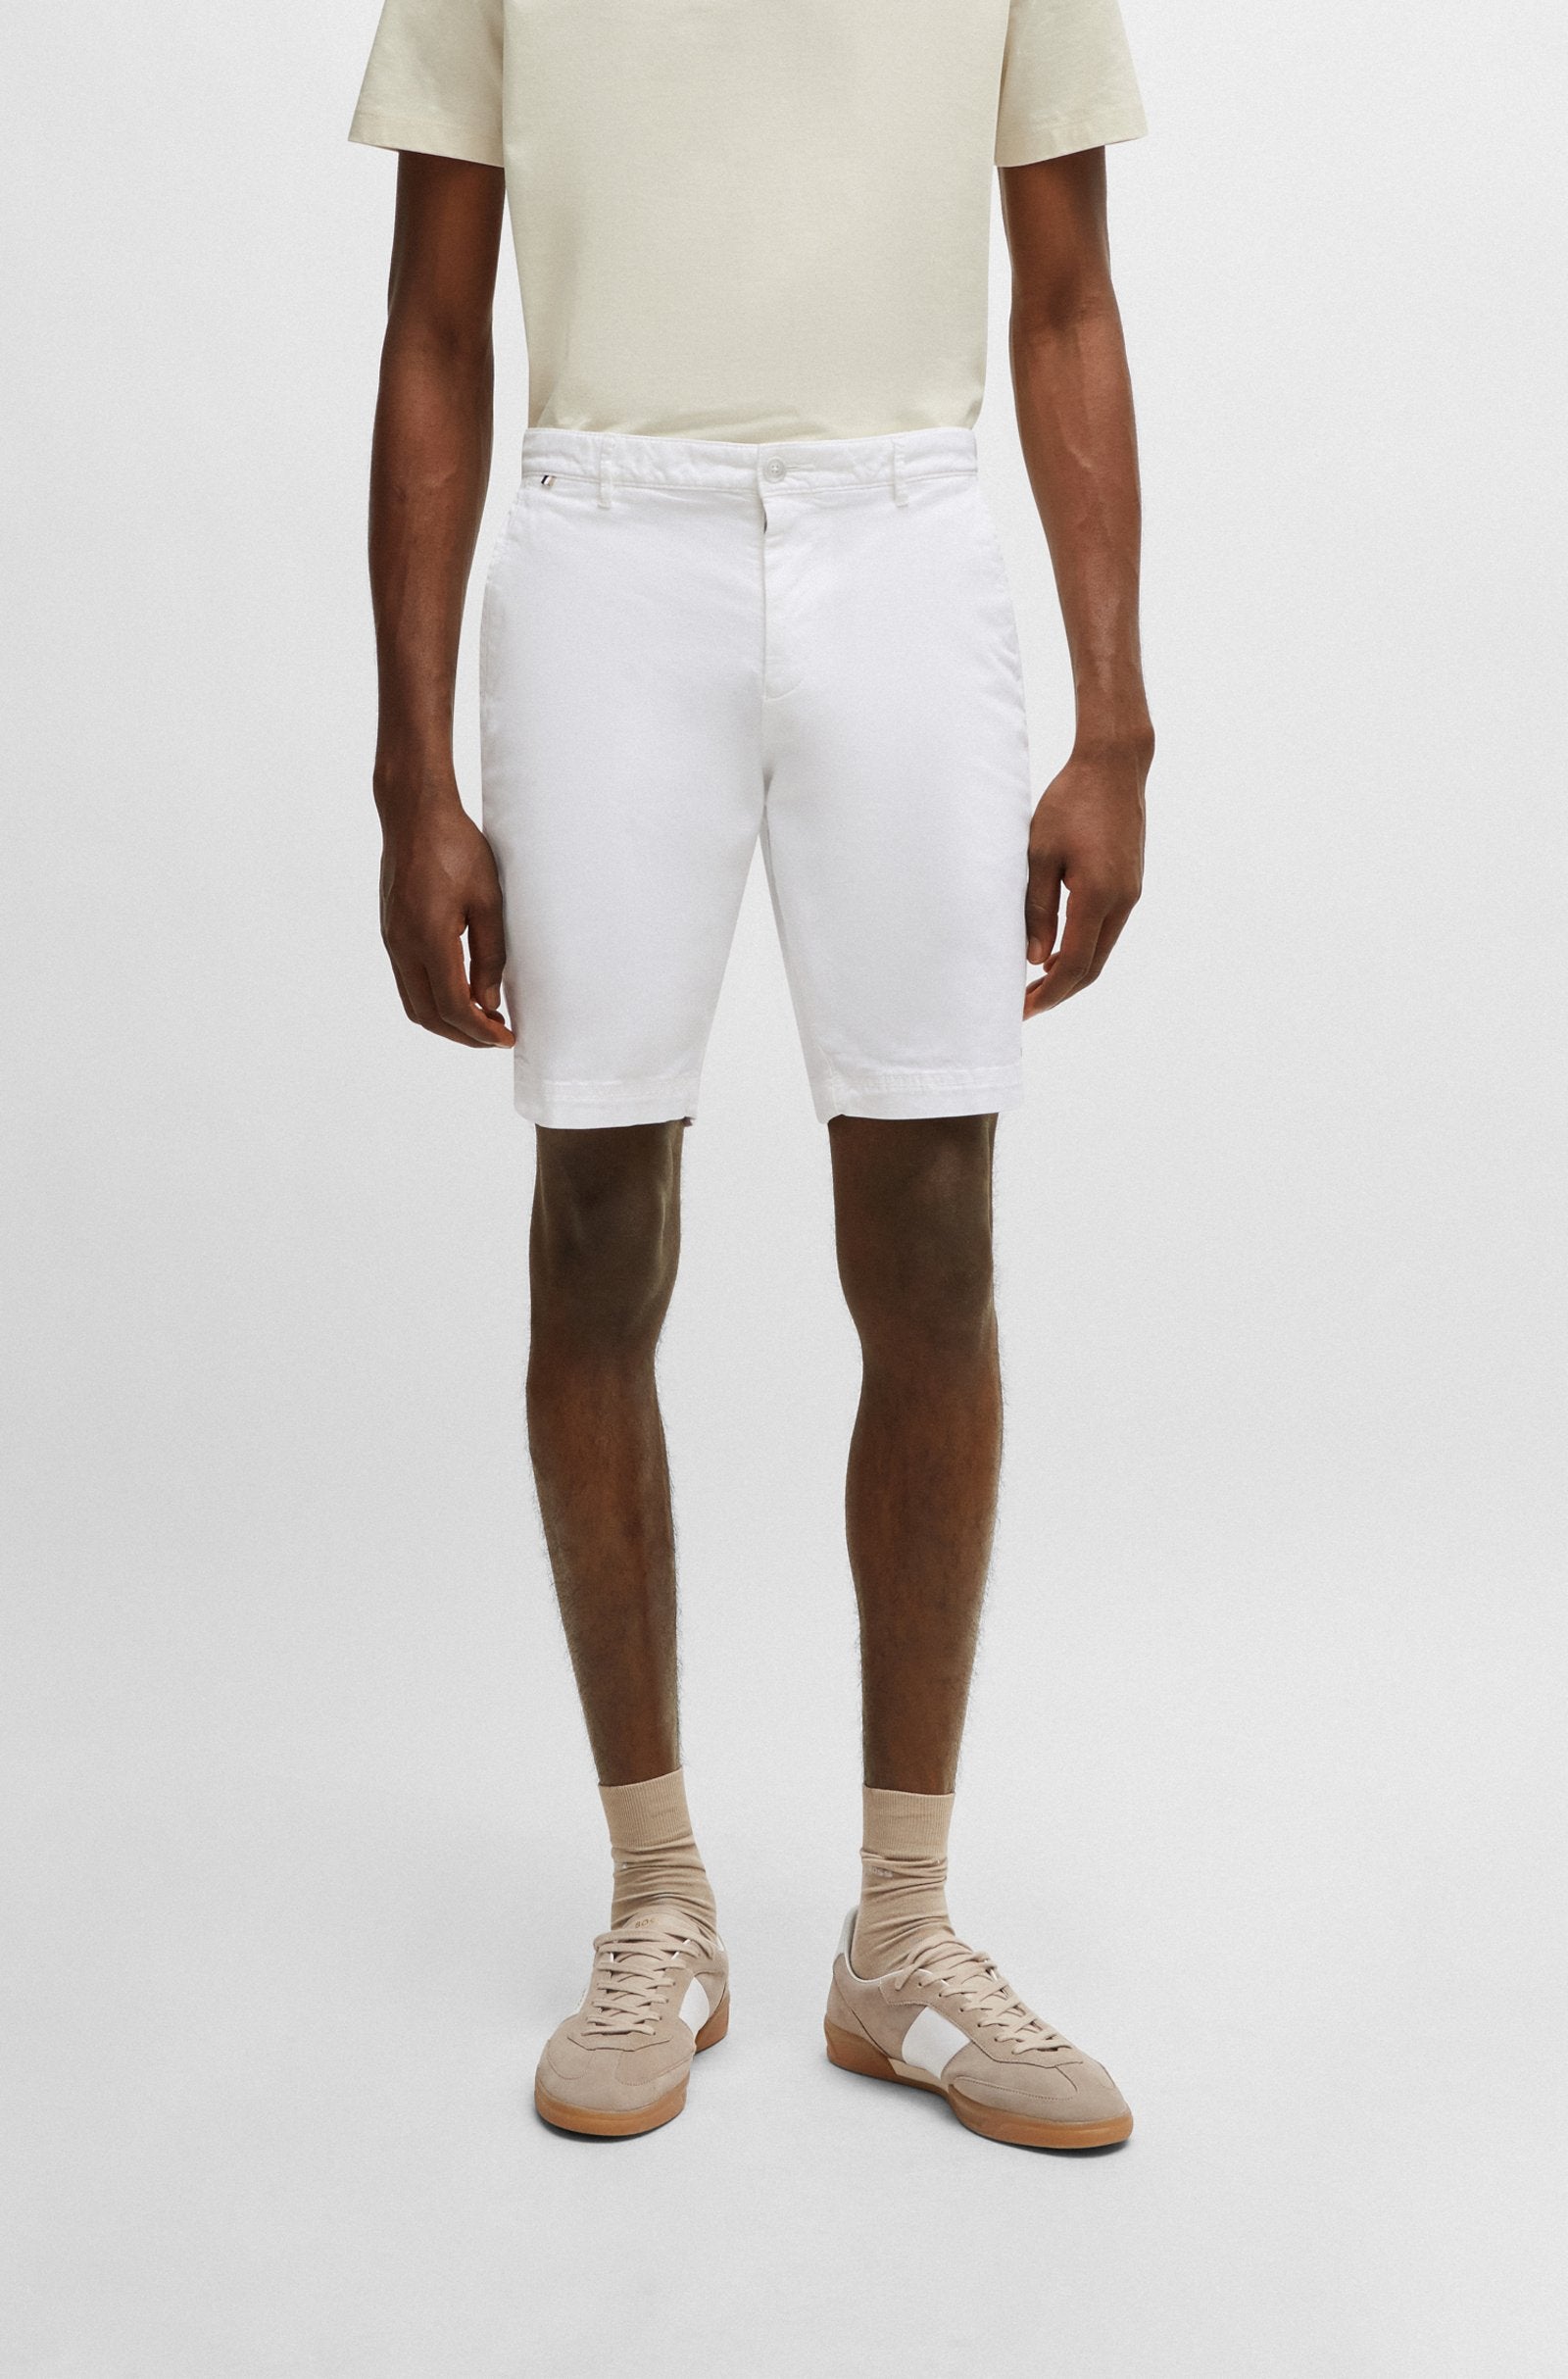 BOSS - SLICE-SHORT White Slim Fit Shorts In Stretch Cotton 50512524 100